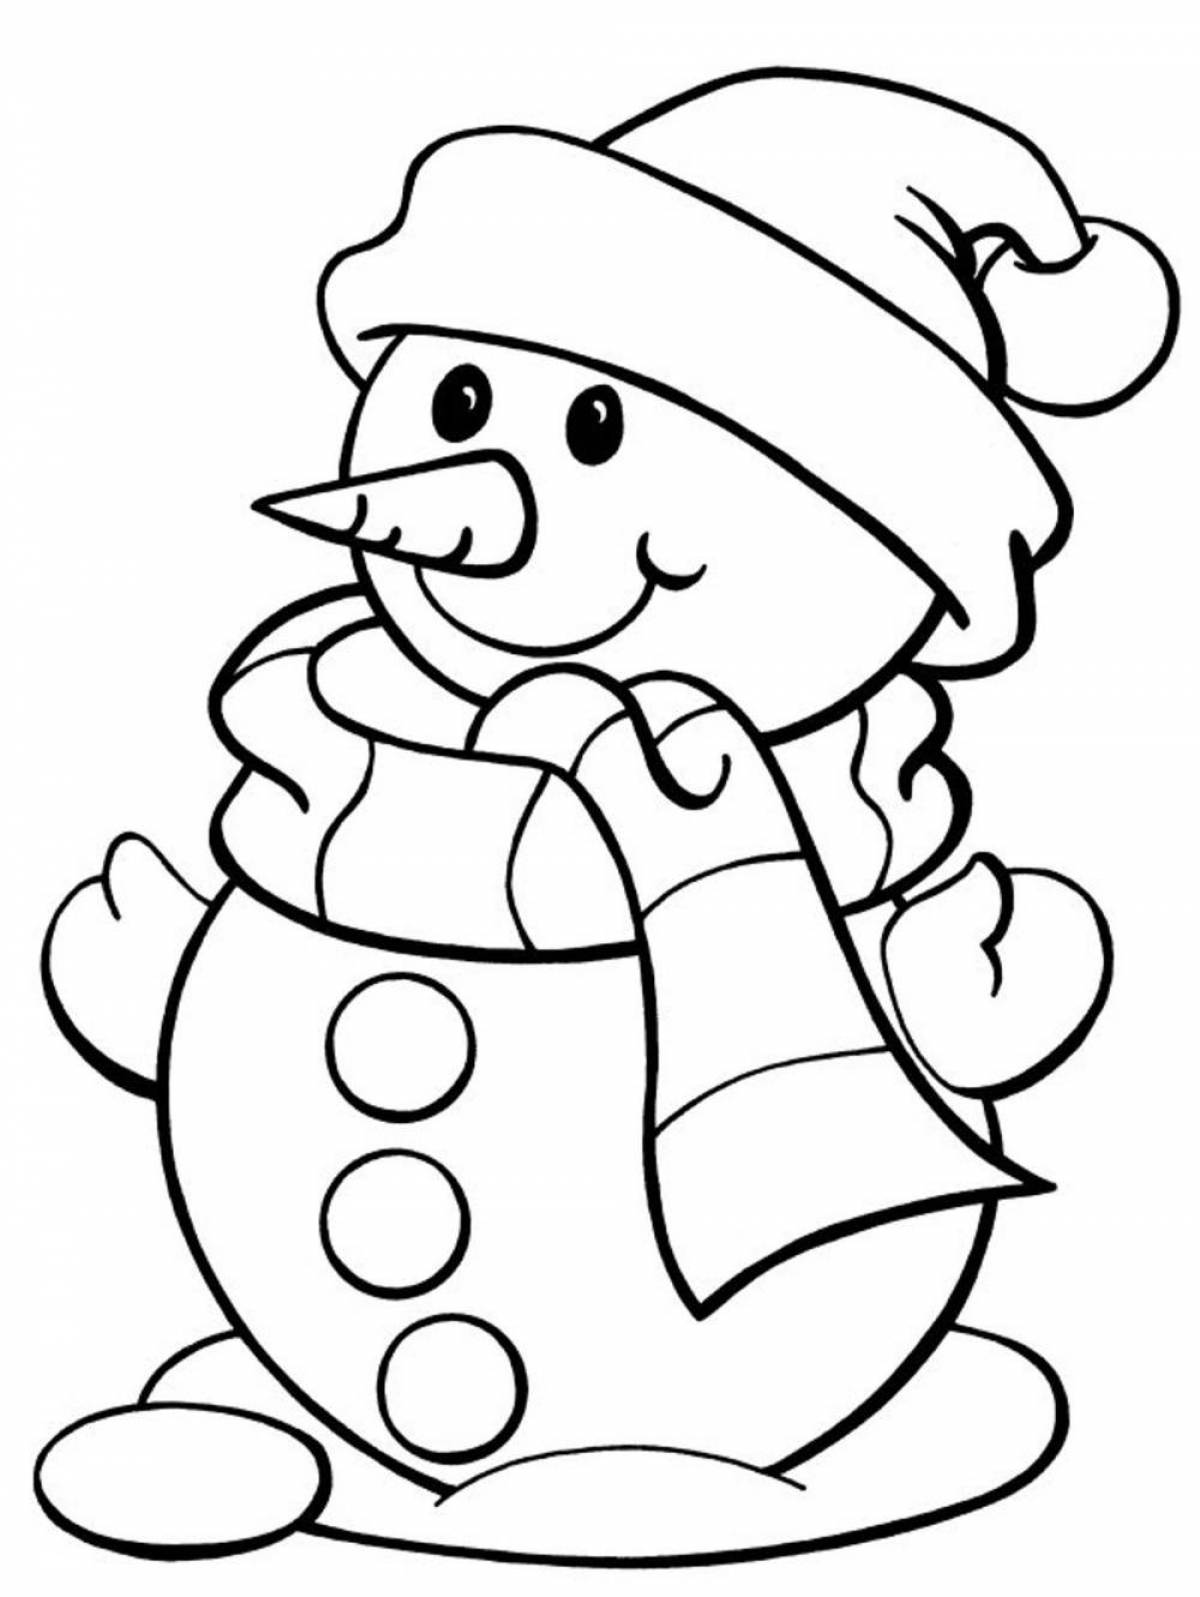 Snowman bright coloring for kids